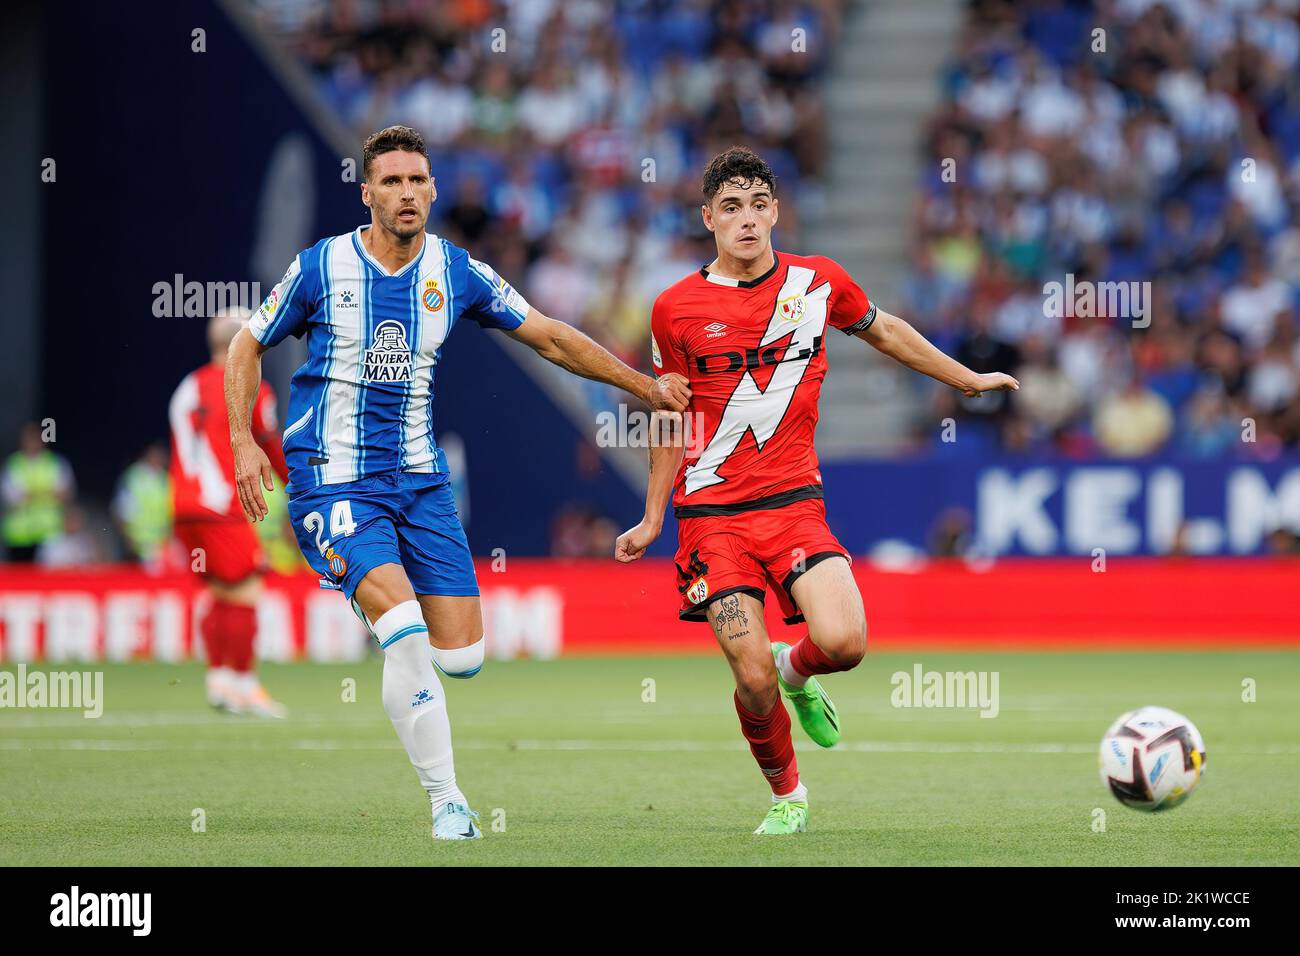 BARCELONA - AUG 19: Sergio Camello in action at the La Liga match between RCD Espanyol and Rayo Vallecano at the RCDE Stadium on August 19, 2022 in Ba Stock Photo